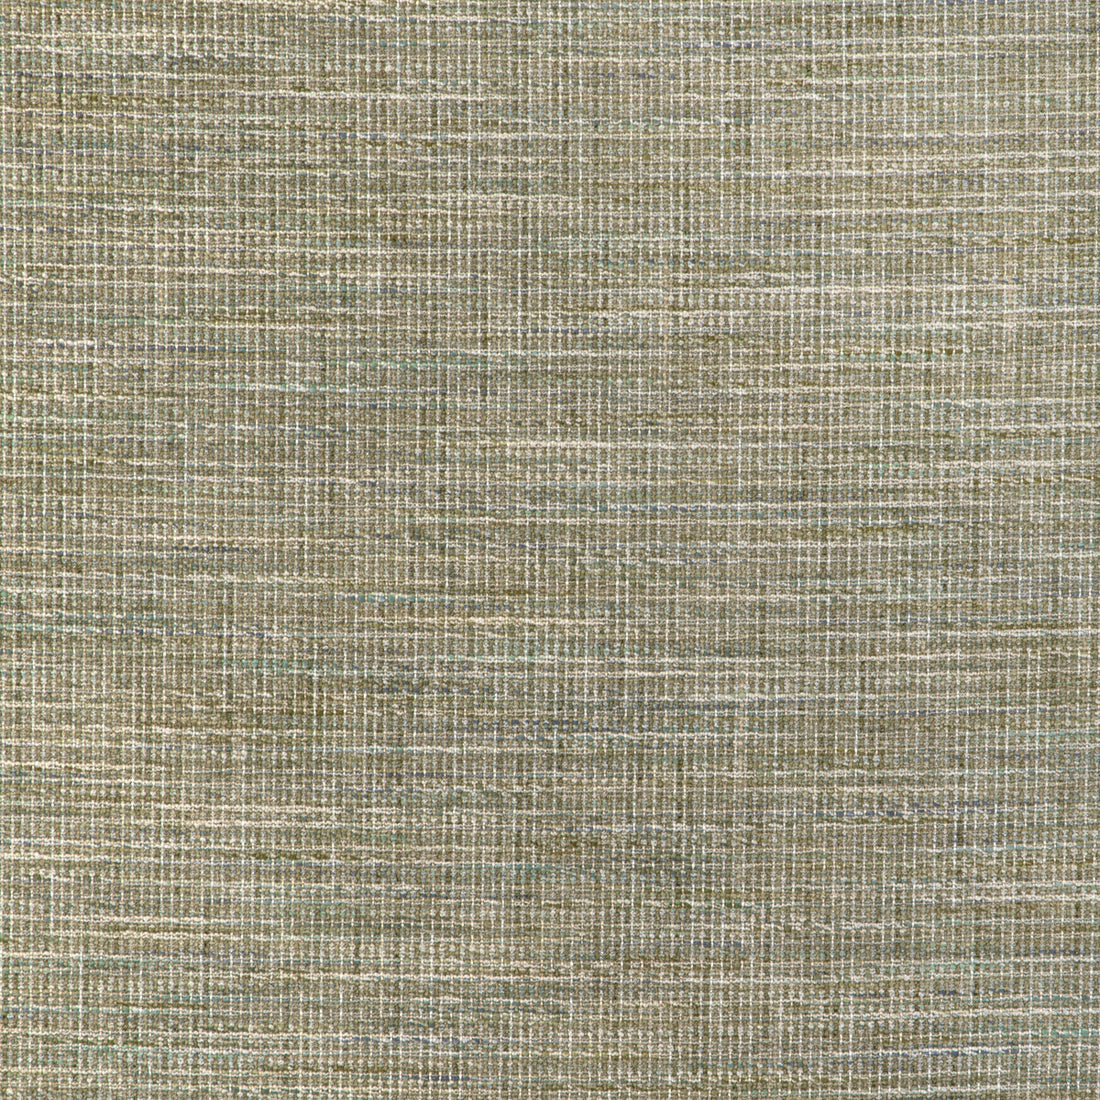 Kravet Design fabric in 37099-353 color - pattern 37099.353.0 - by Kravet Design in the Woven Colors collection